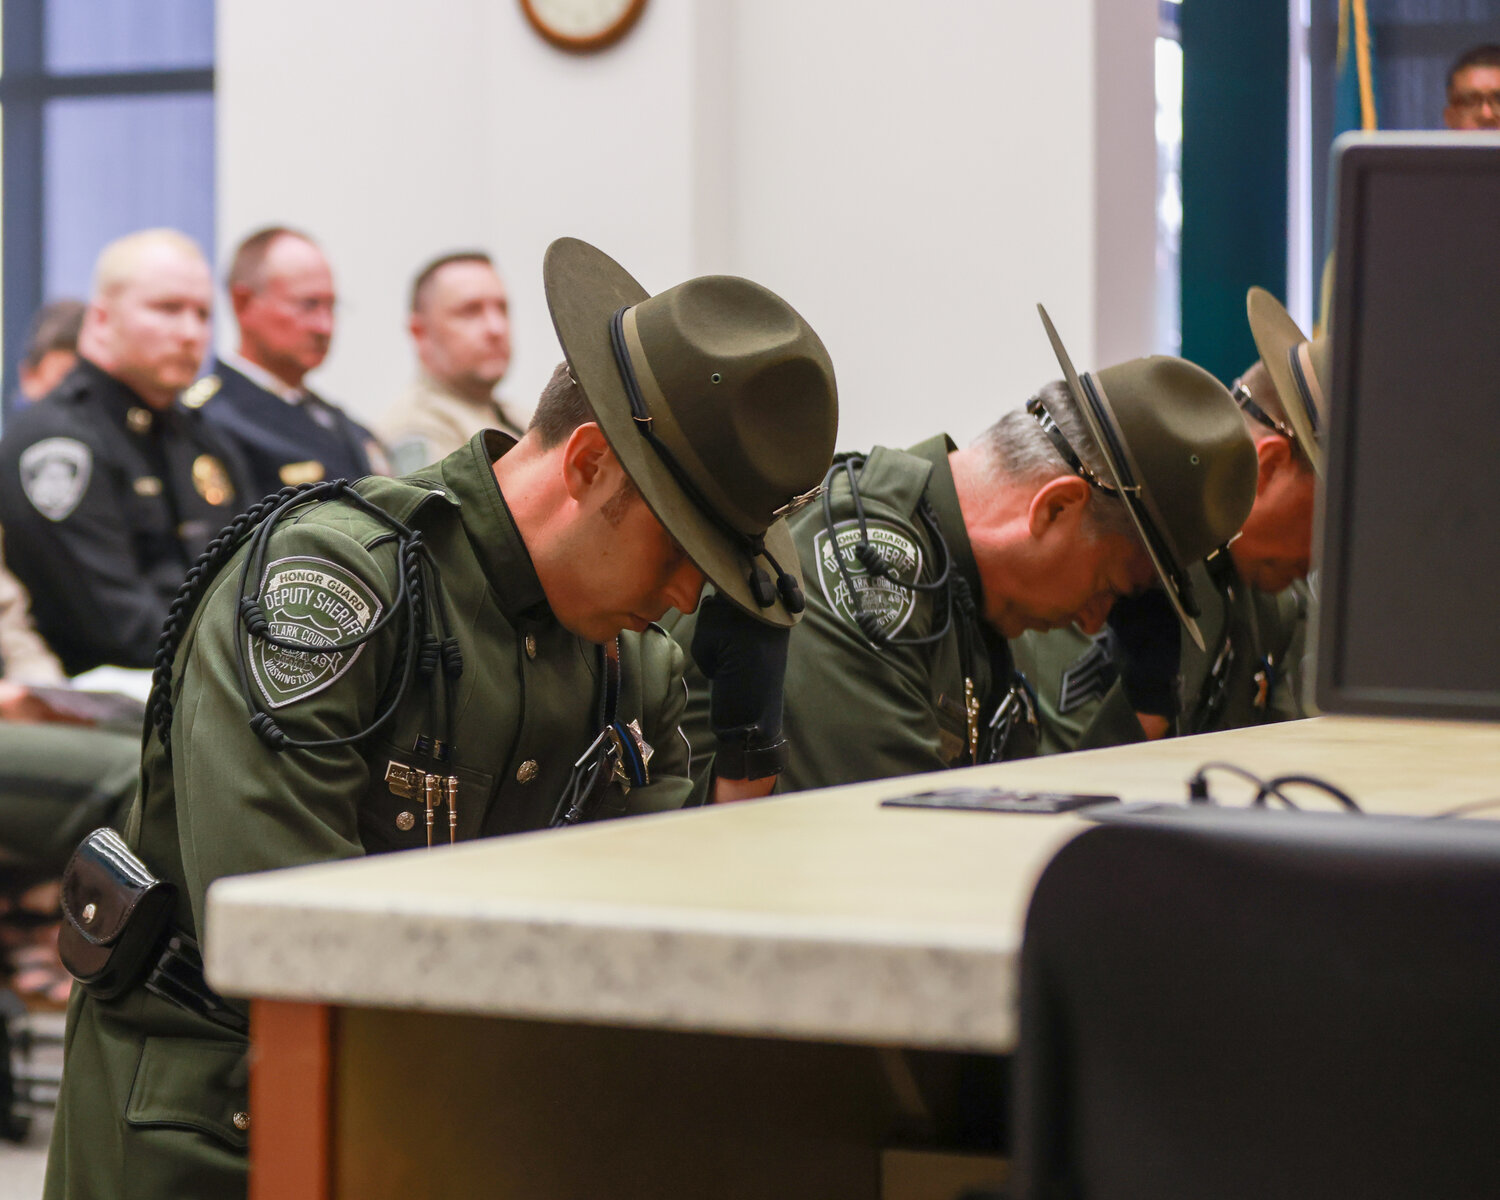 Members of the Clark County Sheriff's Office Honor Guard kneel during the bell ceremony during the Clark County Law Enforcement Memorial Ceremony in Vancouver on Thursday, May 18.